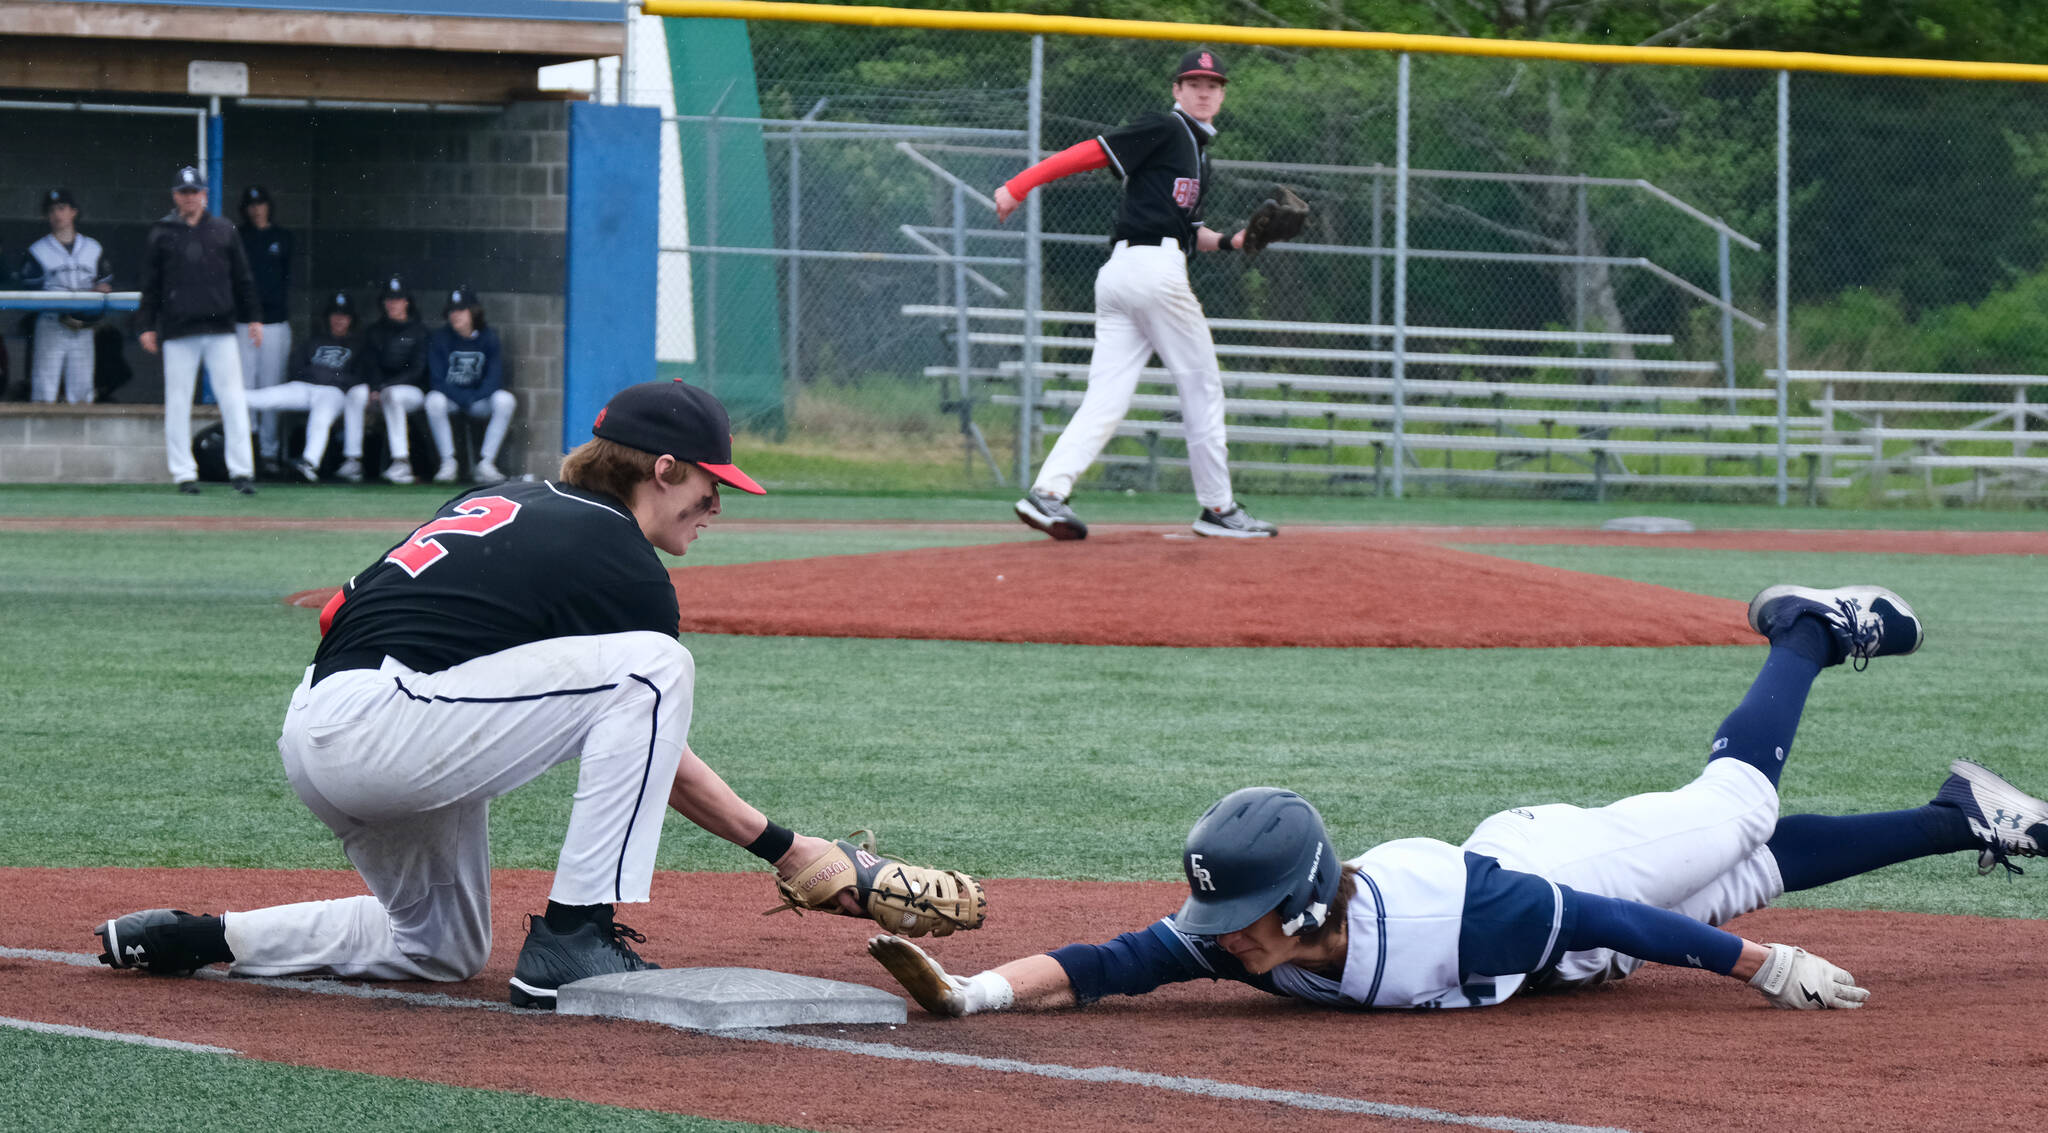 JDHS senior first baseman Bodhi Miller tags out Eagle River junior base runner Gunner Mountcastle on a pick off move from pitcher Eli Crupi during the Crimson Bears 2-1 loss to the Wolves in an elimination game Friday at the ASAA Division I State Baseball Championships on Sitka’s Moller Field. (Klas Stolpe / Juneau Empire)